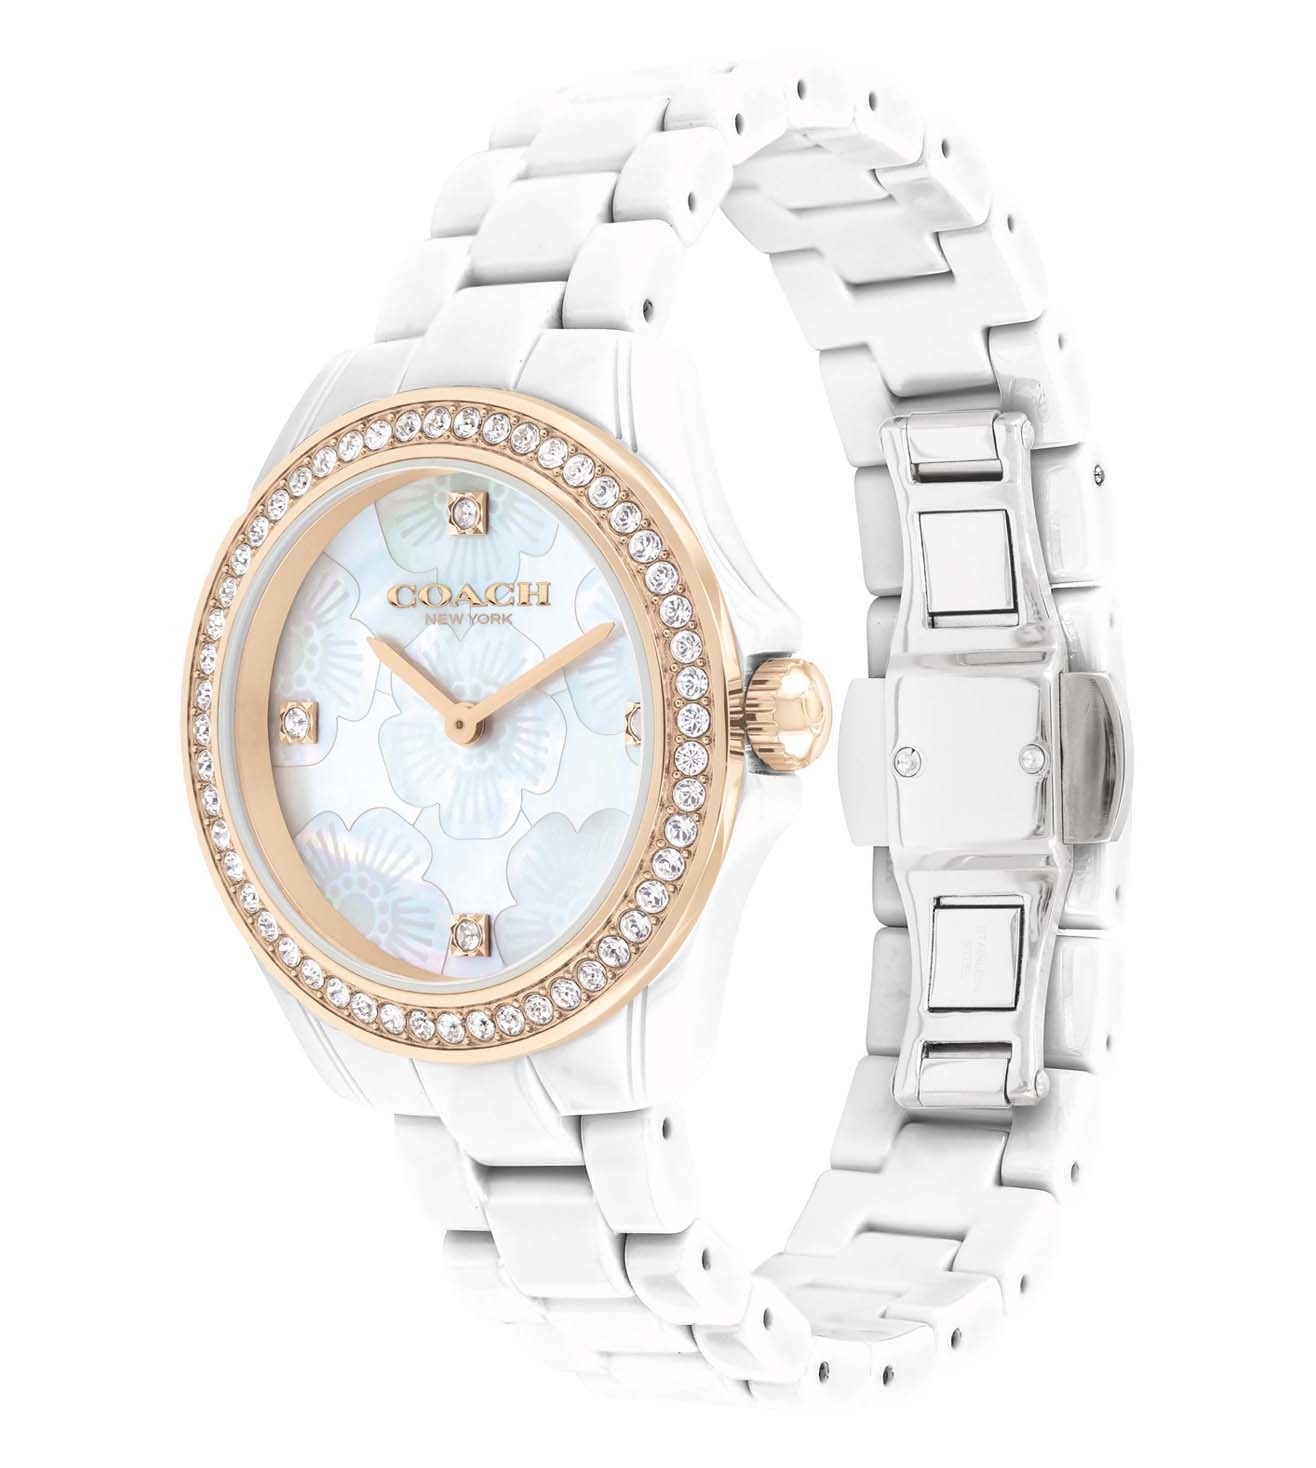 ĐỒNG HỒ NỮ COACH WOMENS 33.25 MM PRESTON MOTHER OF PEARL DIAL STAINLESS STEEL ANALOGUE WATCH 4